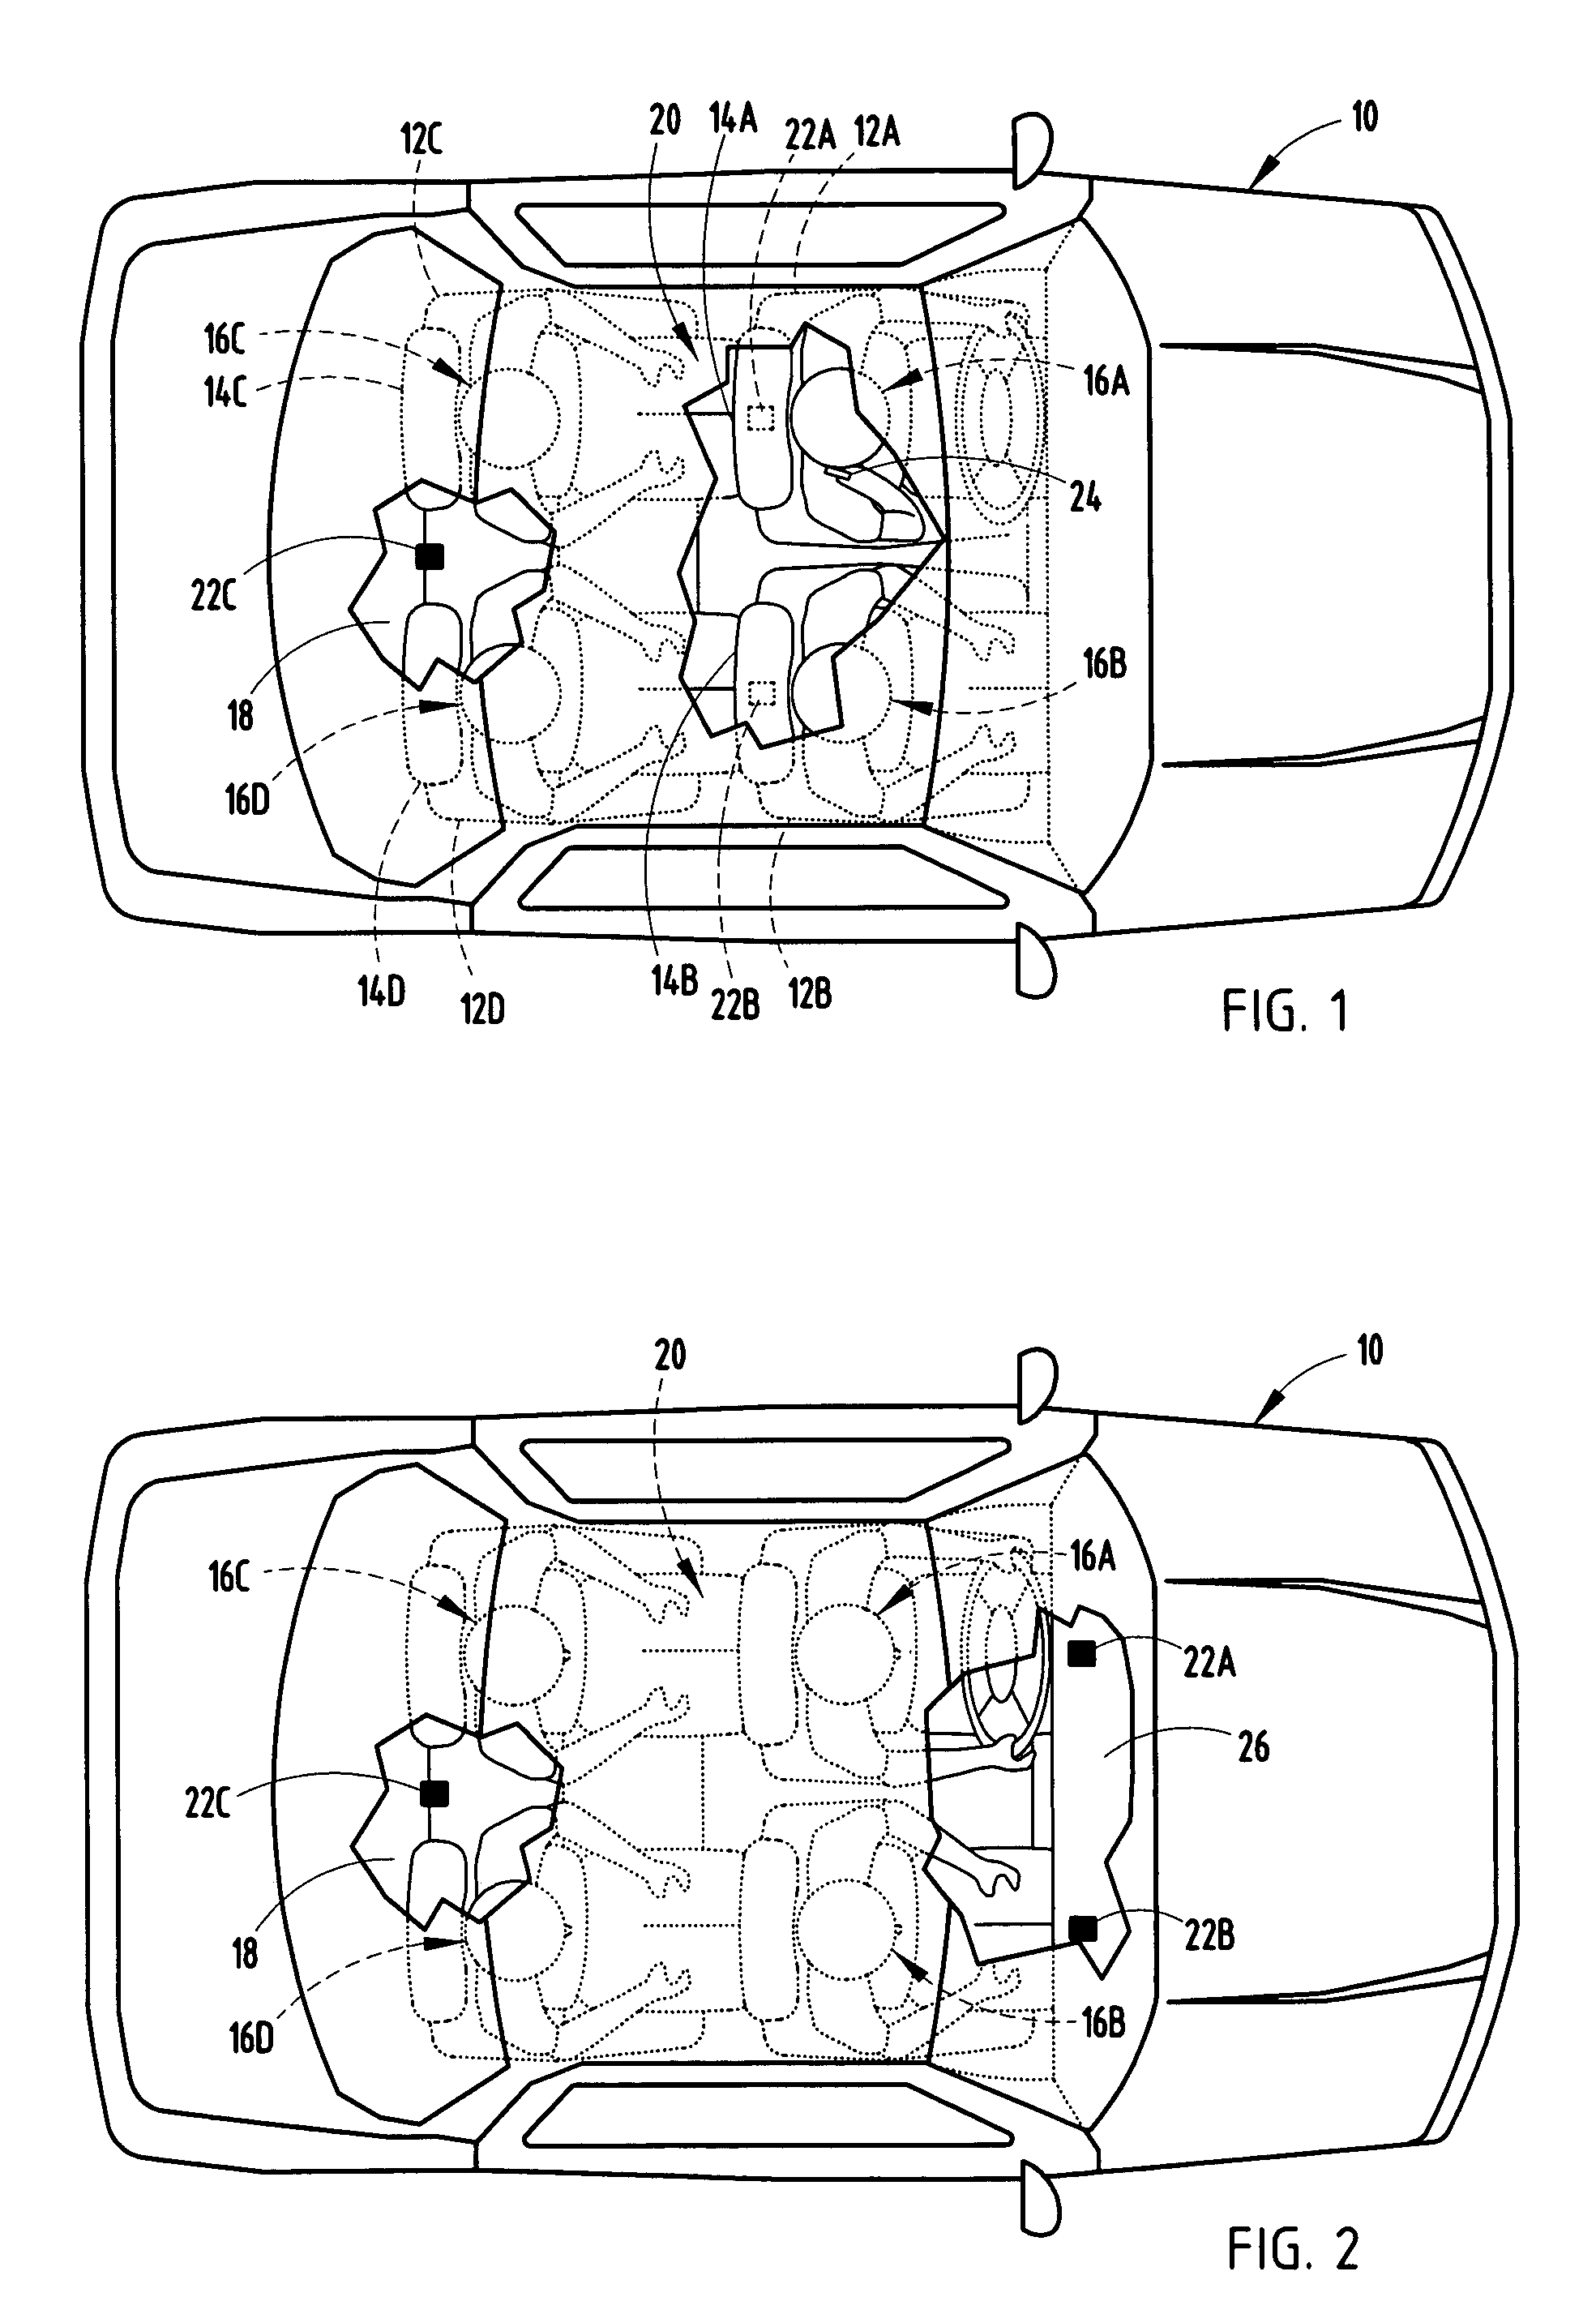 Vehicle RF device detection system and method